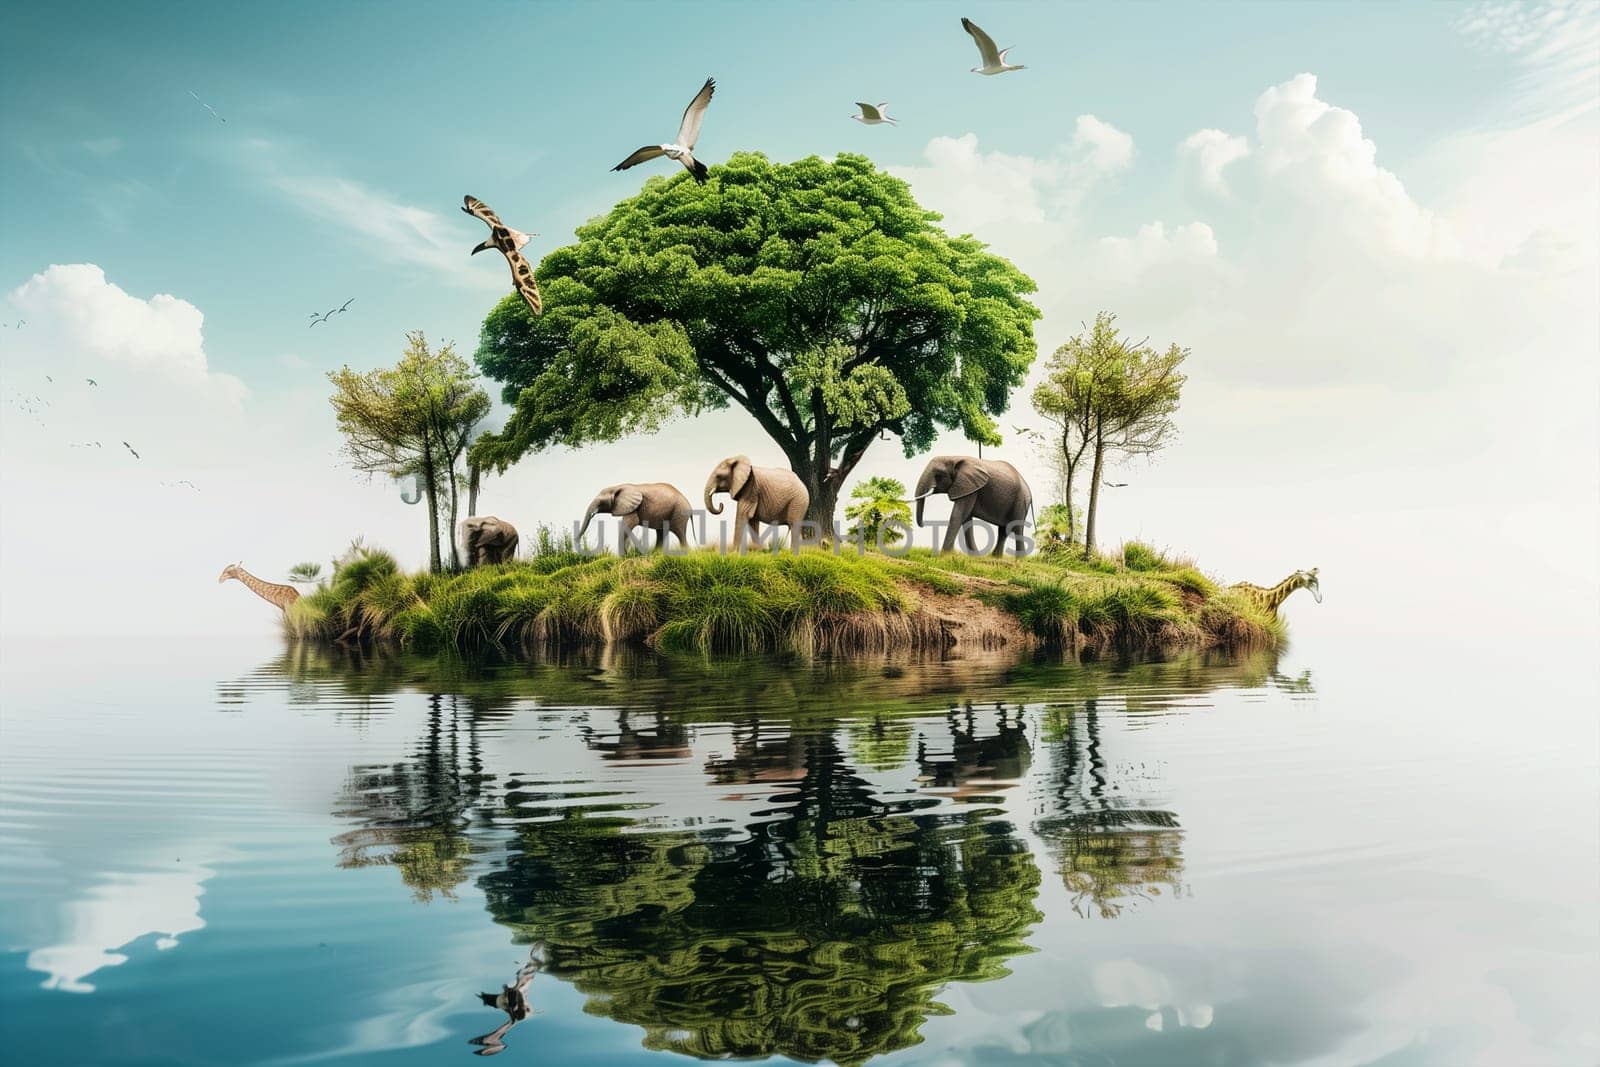 A group of elephants standing on top of a small island surrounded by water.